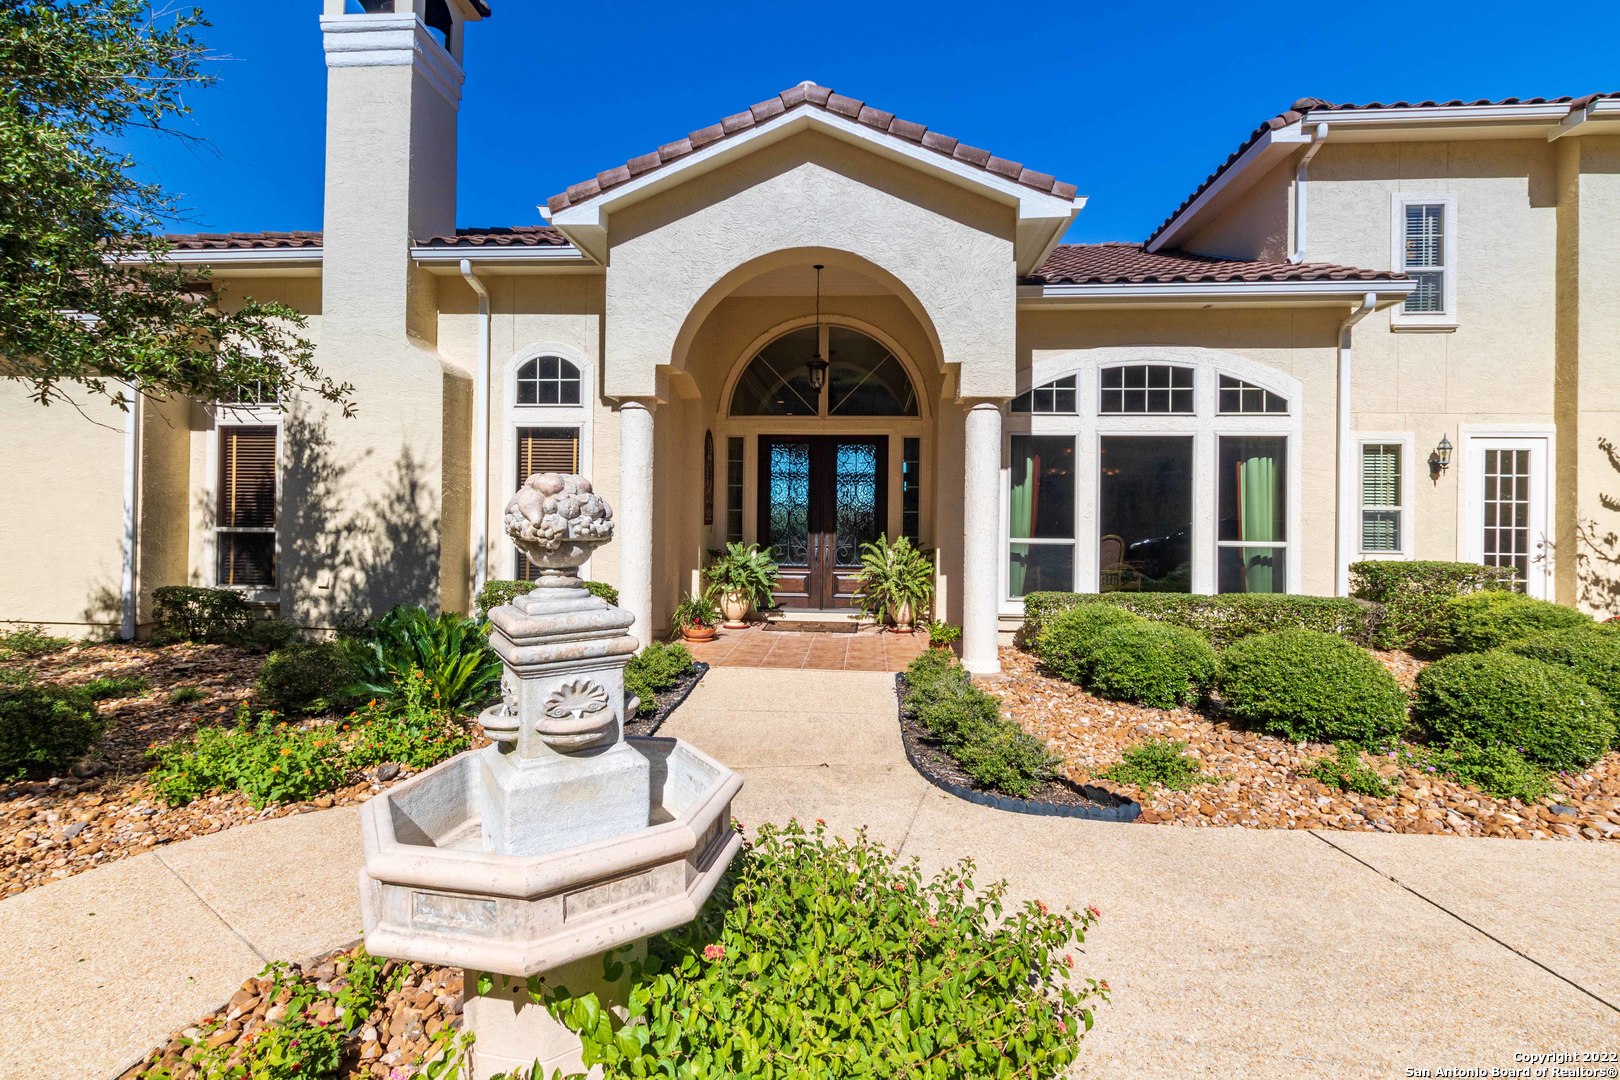 As you enter the grounds of this 1.5-acre estate, in the heart of the prestigious Tapatio Springs golf community, you feel the quality and privacy of the home you are about to tour. Immediately after entering the home, you will notice the custom details that abound throughout this estate. As much as you desire to tour the home, the view will draw you out to the stunning hill country, golf course, seasonal creek and resort views off of the large covered patio. After catching your breath, the tour begins with a well-appointed great room that includes cased windows, stair stepped ceilings with recessed lighting, Roman columns, niches with puck lights, travertine floors, gas log fireplace and more! Most features in this room are continued throughout the rooms in this extremely detailed home. The gourmet kitchen will impress the best of chefs, with commercial style gas cook top, complete with grill and griddle, double ovens, warming drawer, appliance garage, vegetable sink with disposal, endless custom cabinet features, under cabinet lighting, built in Thermador refrigerator, plenty of counter space, huge walk-in pantry and natural light abounds. As you leave the kitchen to enter the dining room, there is a butler pantry along with a dry bar, stemware storage, wine chiller and beverage prep area.  The dining room itself has beautiful ceiling details and lighting that can be set for any mood desired. The luxurious media room features custom, hardwood cabinets, another gas fireplace, surround sound entertainment center, with components that provide stereo throughout the house, when desired. The ceilings in this room feature cove lighting that projects the perfect amount of light when enjoying movies. The owner's suite features two large closets, coffered ceiling, built in cabinets with lots of storage, large windows overlooking the majestic views and access to the patio and entertainment areas. The ensuite bath features separate vanities, garden tub, large shower with multiple shower heads, built in drawers, cabinets and hamper, along with gorgeous tile details throughout. The adjoining exercise room features not only plenty of space for work outs but also has a full, true sauna. The office is breathtaking with cherry wood cabinets, built in bookcases and desk, complete with more long distance, stunning views! The upstairs bedrooms each have their own bathroom and large walk-in closets. In addition to the upstairs bedrooms, there is a flex room that would make a wonderful game room or could be converted in to another, secondary suite with full bath. The laundry room features plenty of storage, counter space for folding, extra refrigerator and a wash basin. Other features include two powder rooms, a central vac, an oversized, three car garage with an abundance of storage, including more custom cabinets, storage closets, etc. Exterior lighting, bocce ball court, plenty of guest parking areas, curbed driveways and lighted limestone cut walls will take your breath away at night. Wrought iron fencing, sprinkler system, built in security system and more.